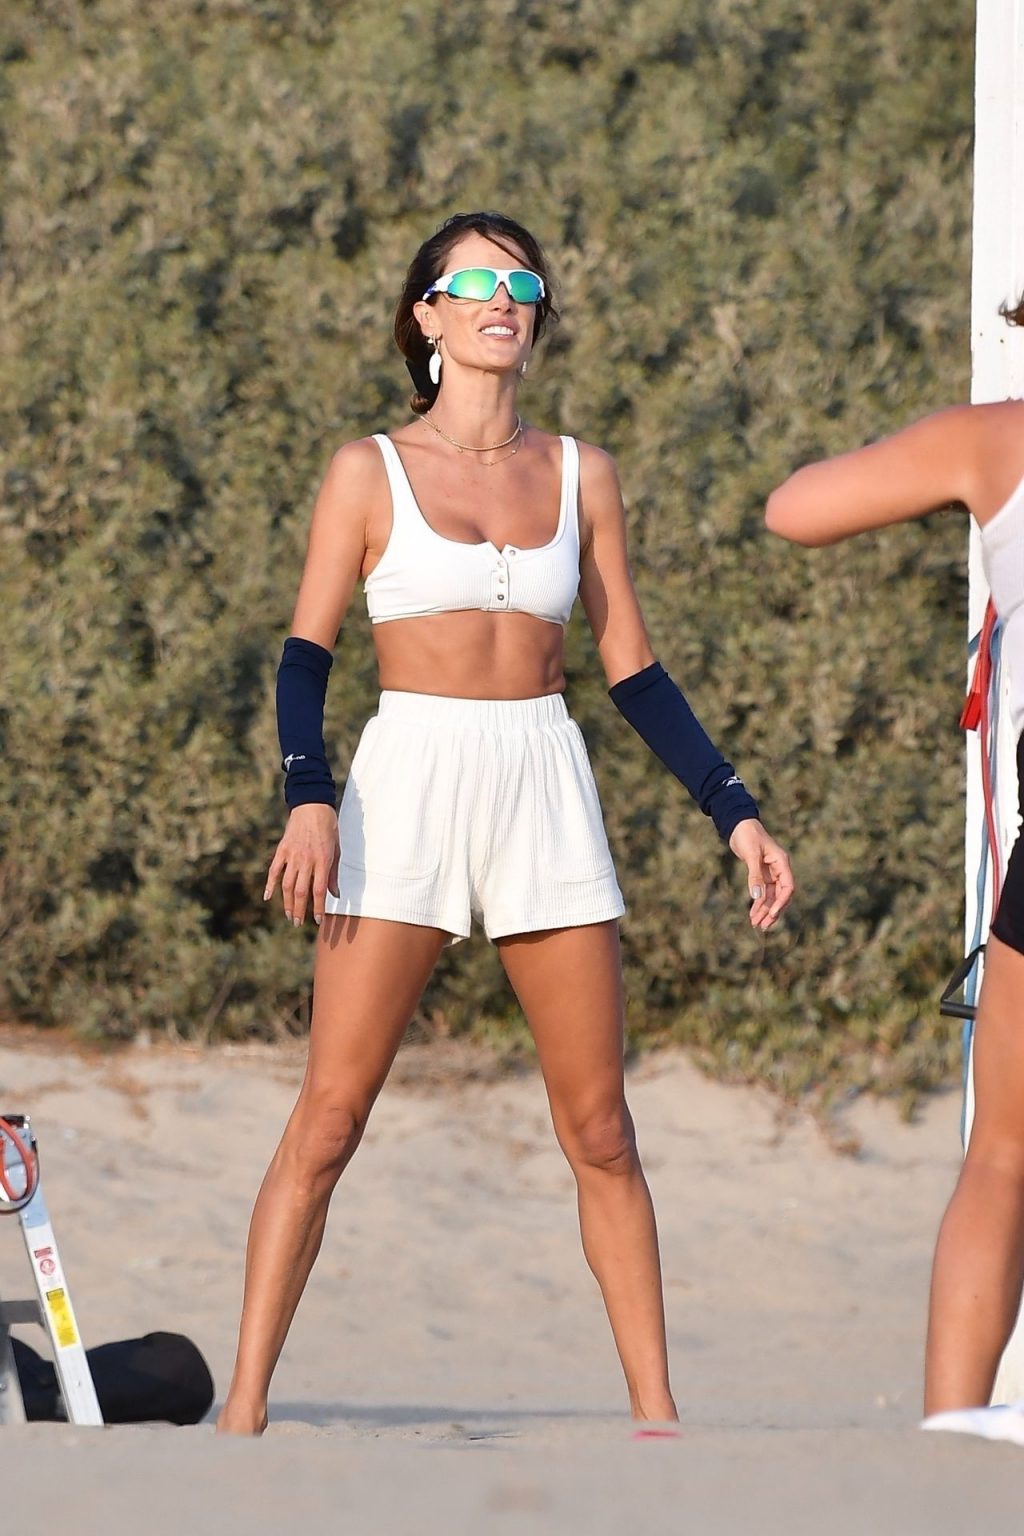 Alessandra Ambrosio Practices Her Volleyball Skills on the Beach with Friends (57 Photos)